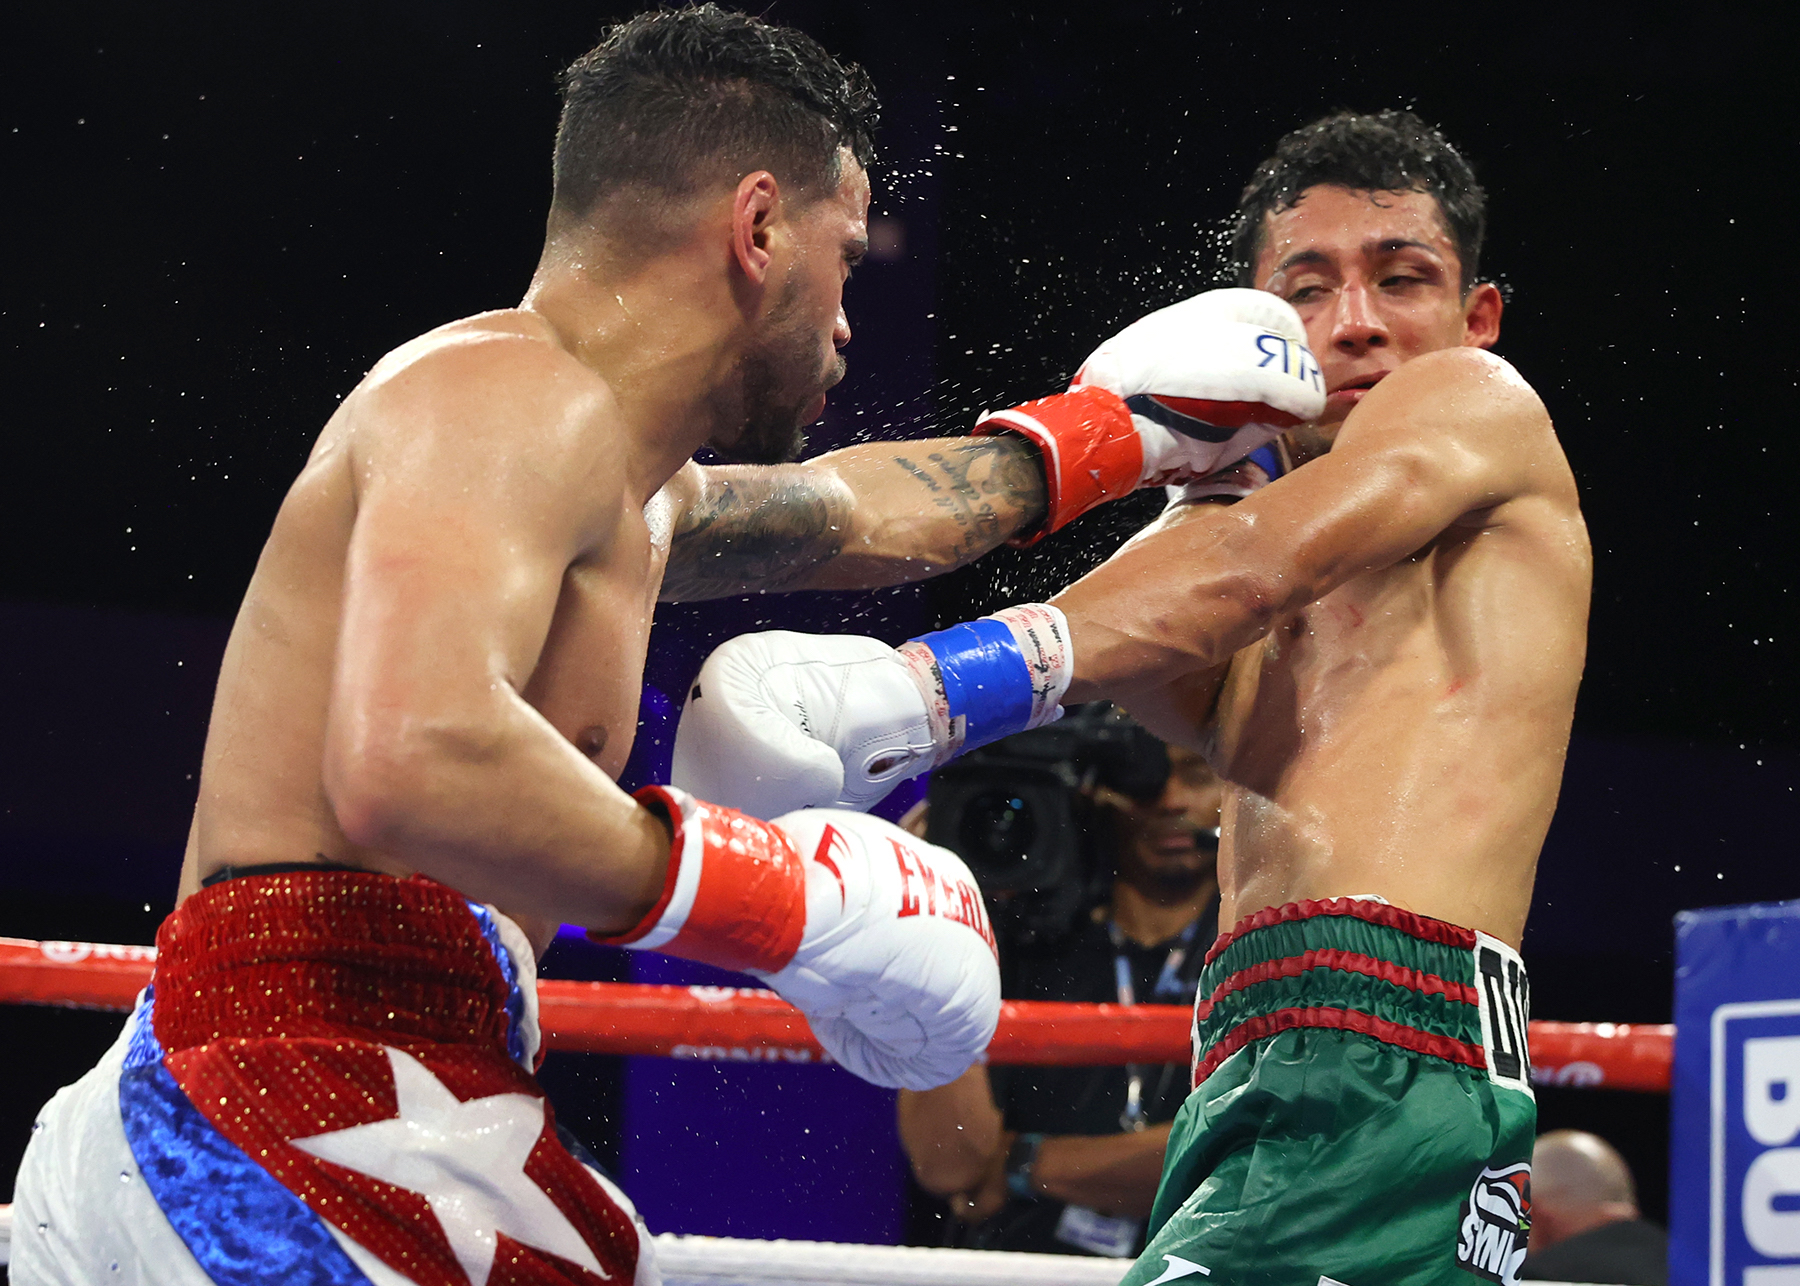 Espinoza says Ramirez 'deserves an opportunity' for rematch after their WBO featherweight thriller